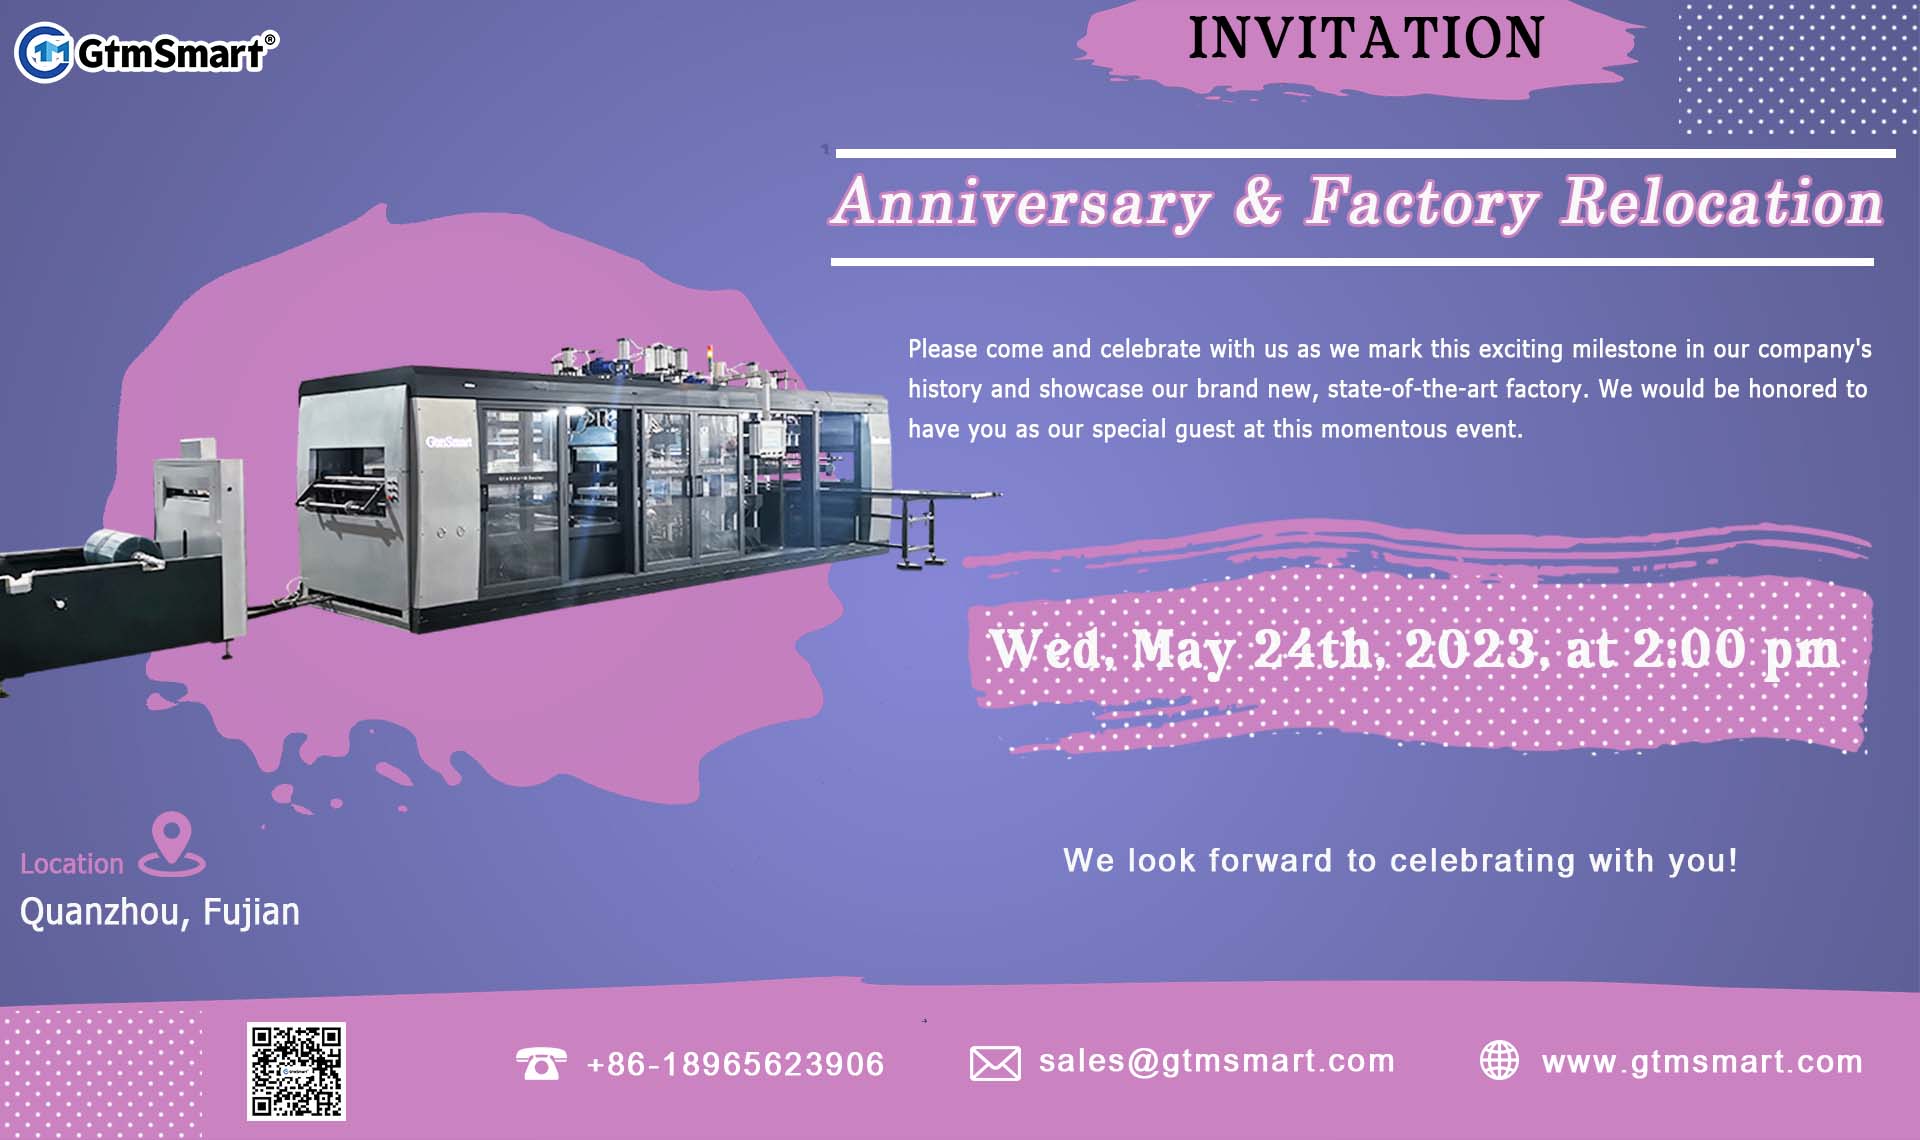 GtmSmart Celebrates Anniversary and Factory Relocation